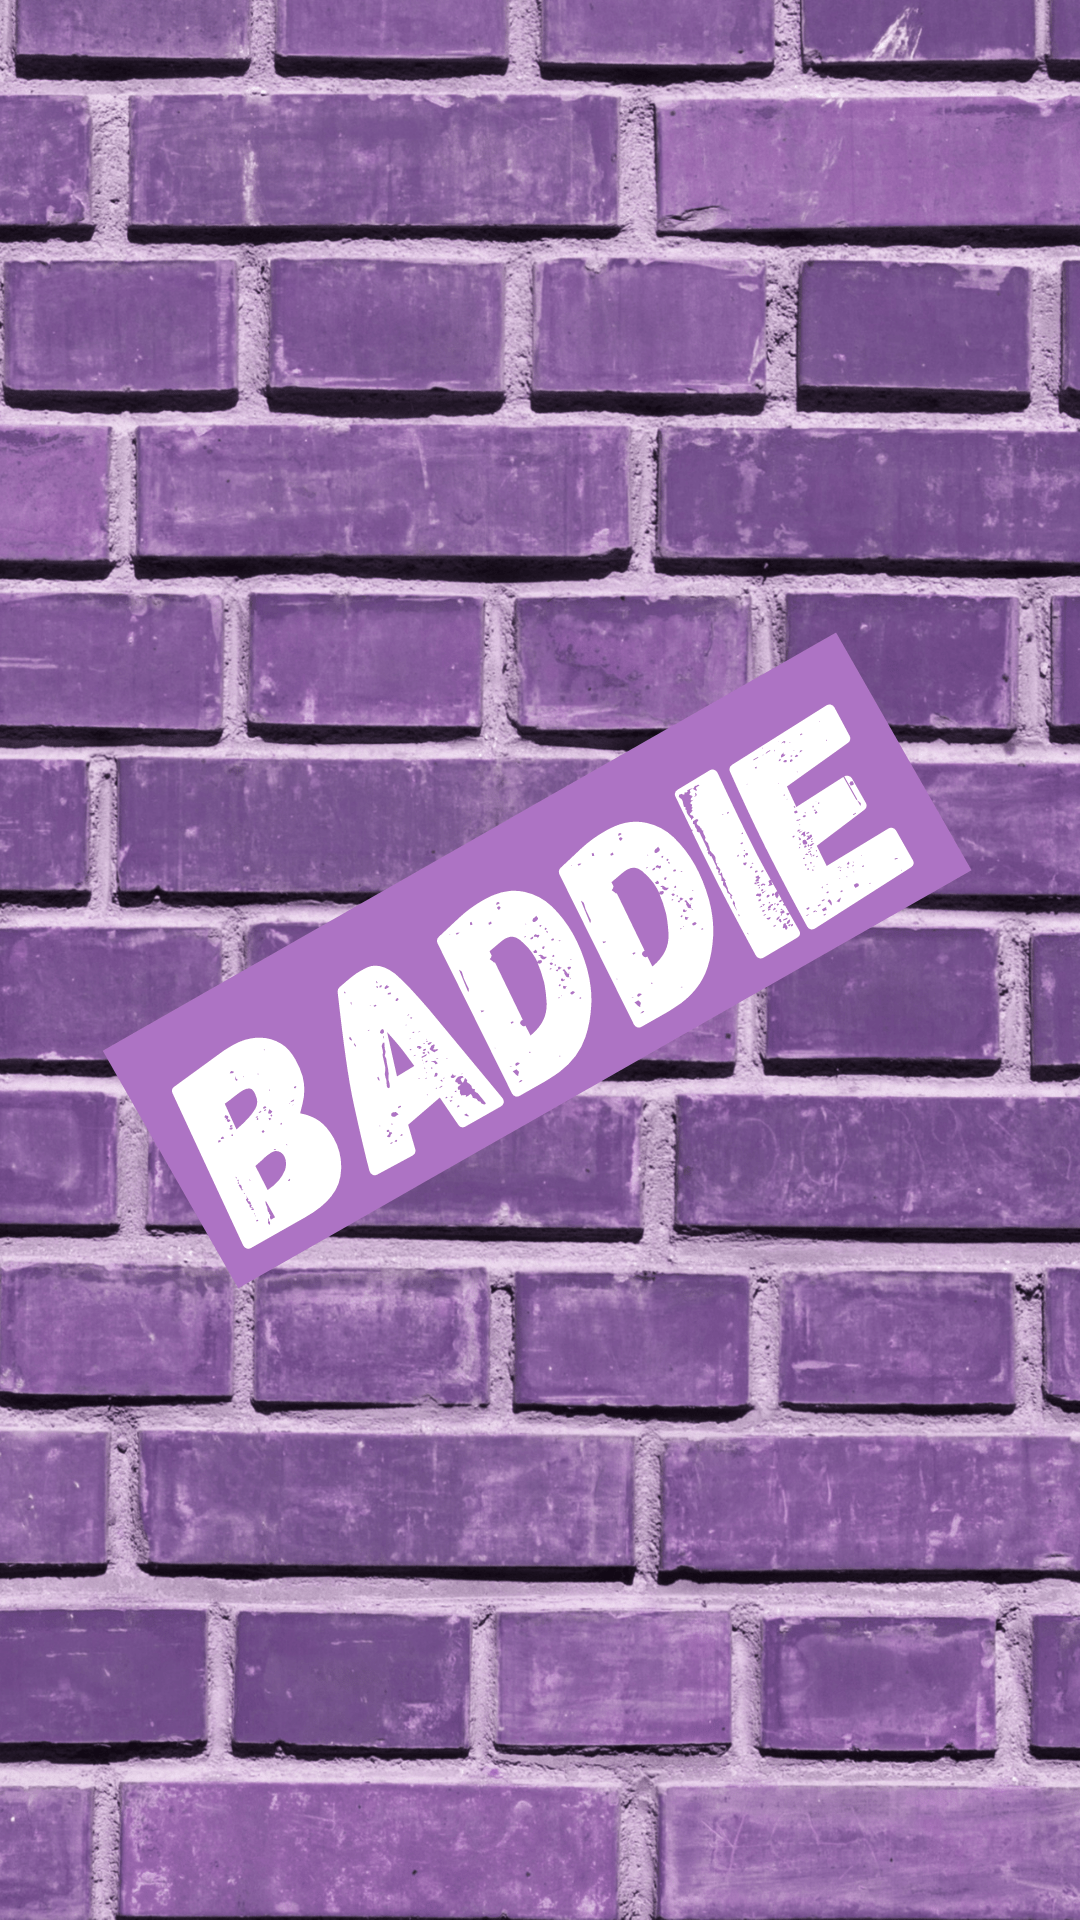 A purple brick wall with a purple rectangle in the center that says 